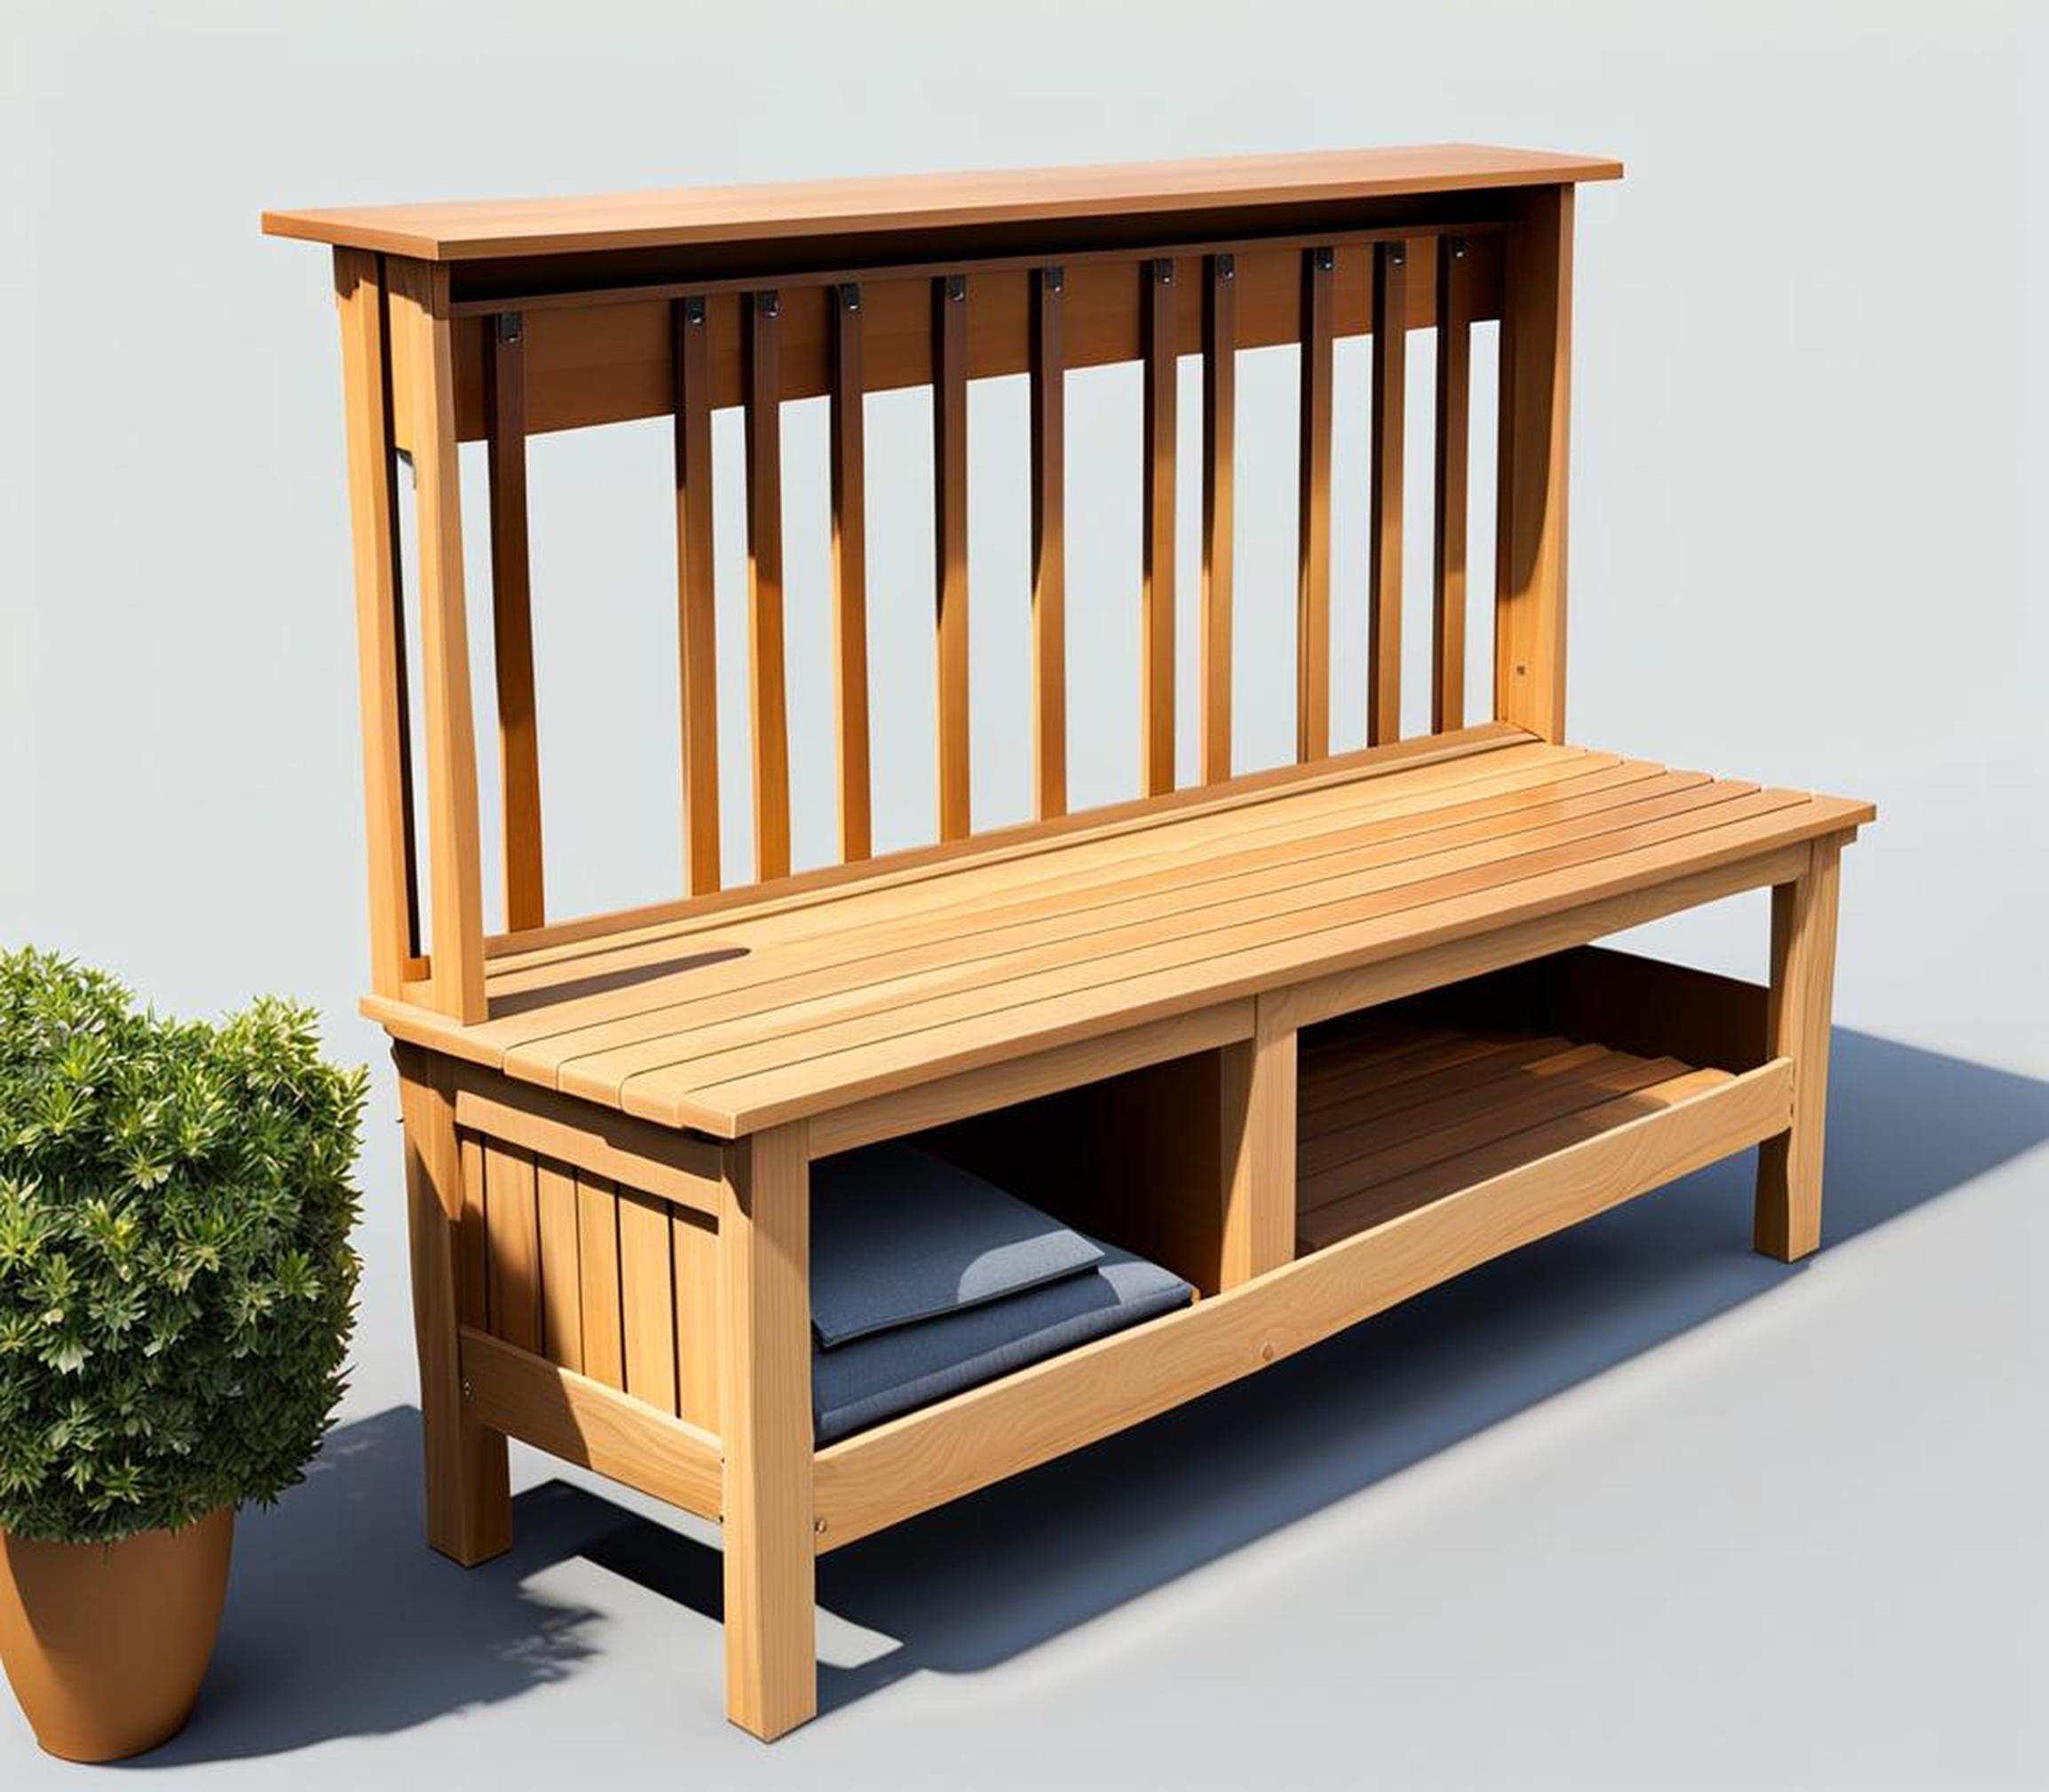 gardeners benches with storage